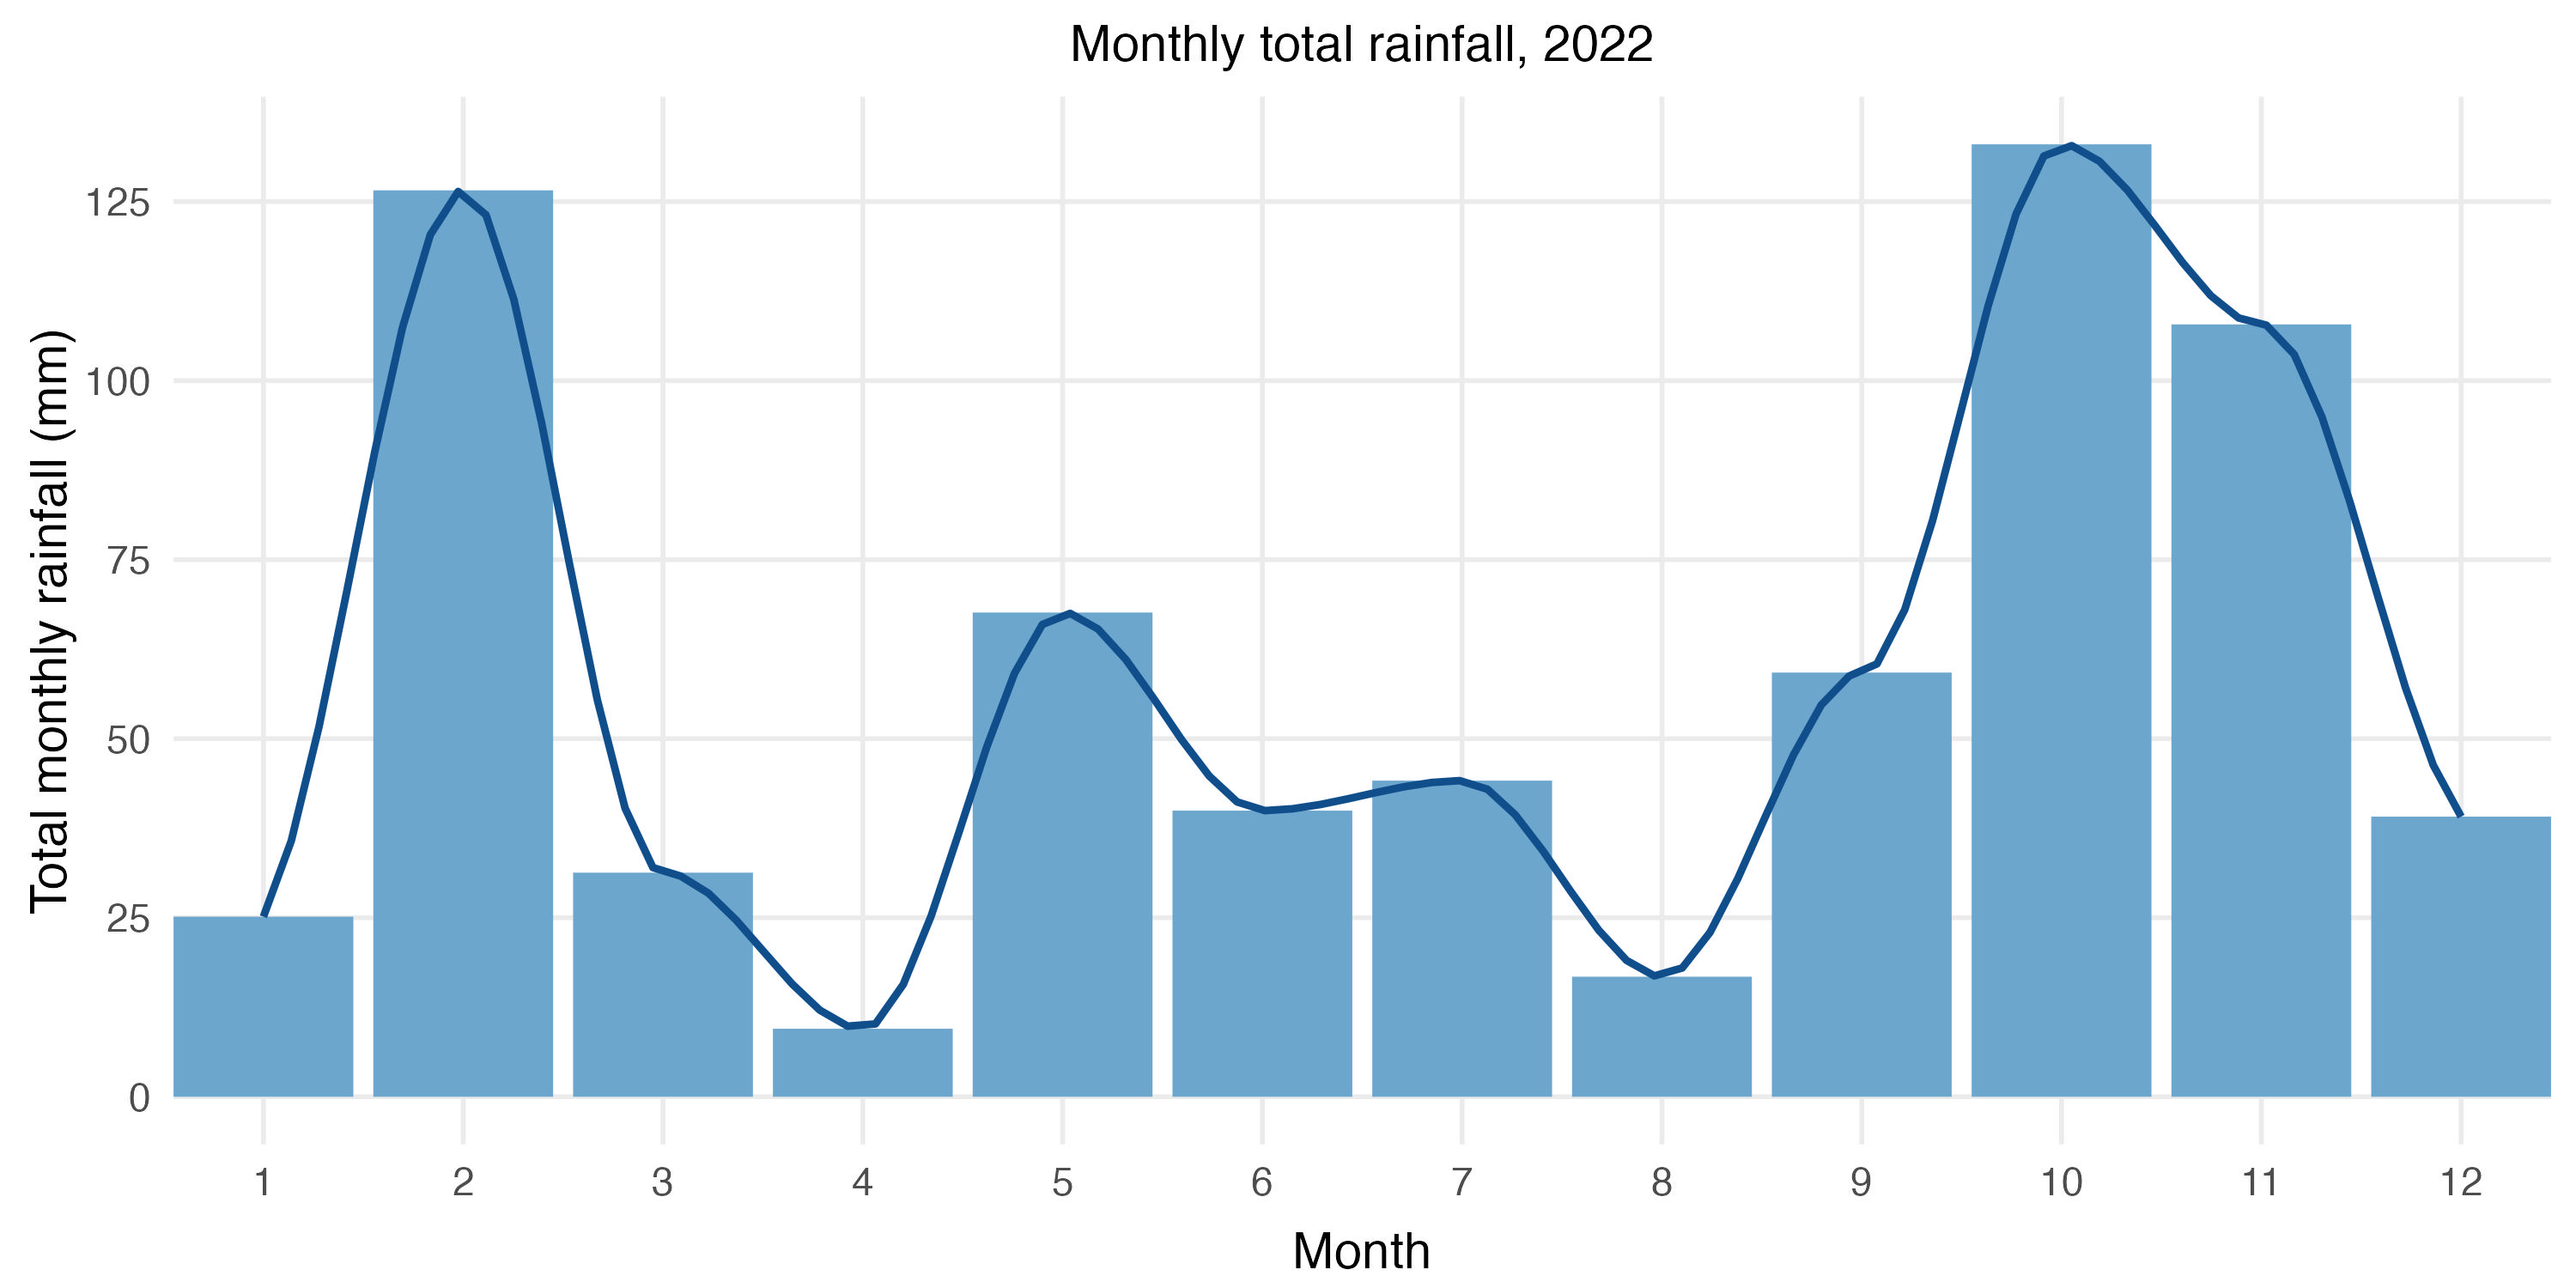 Plot of the monthly rainfall totals and trend